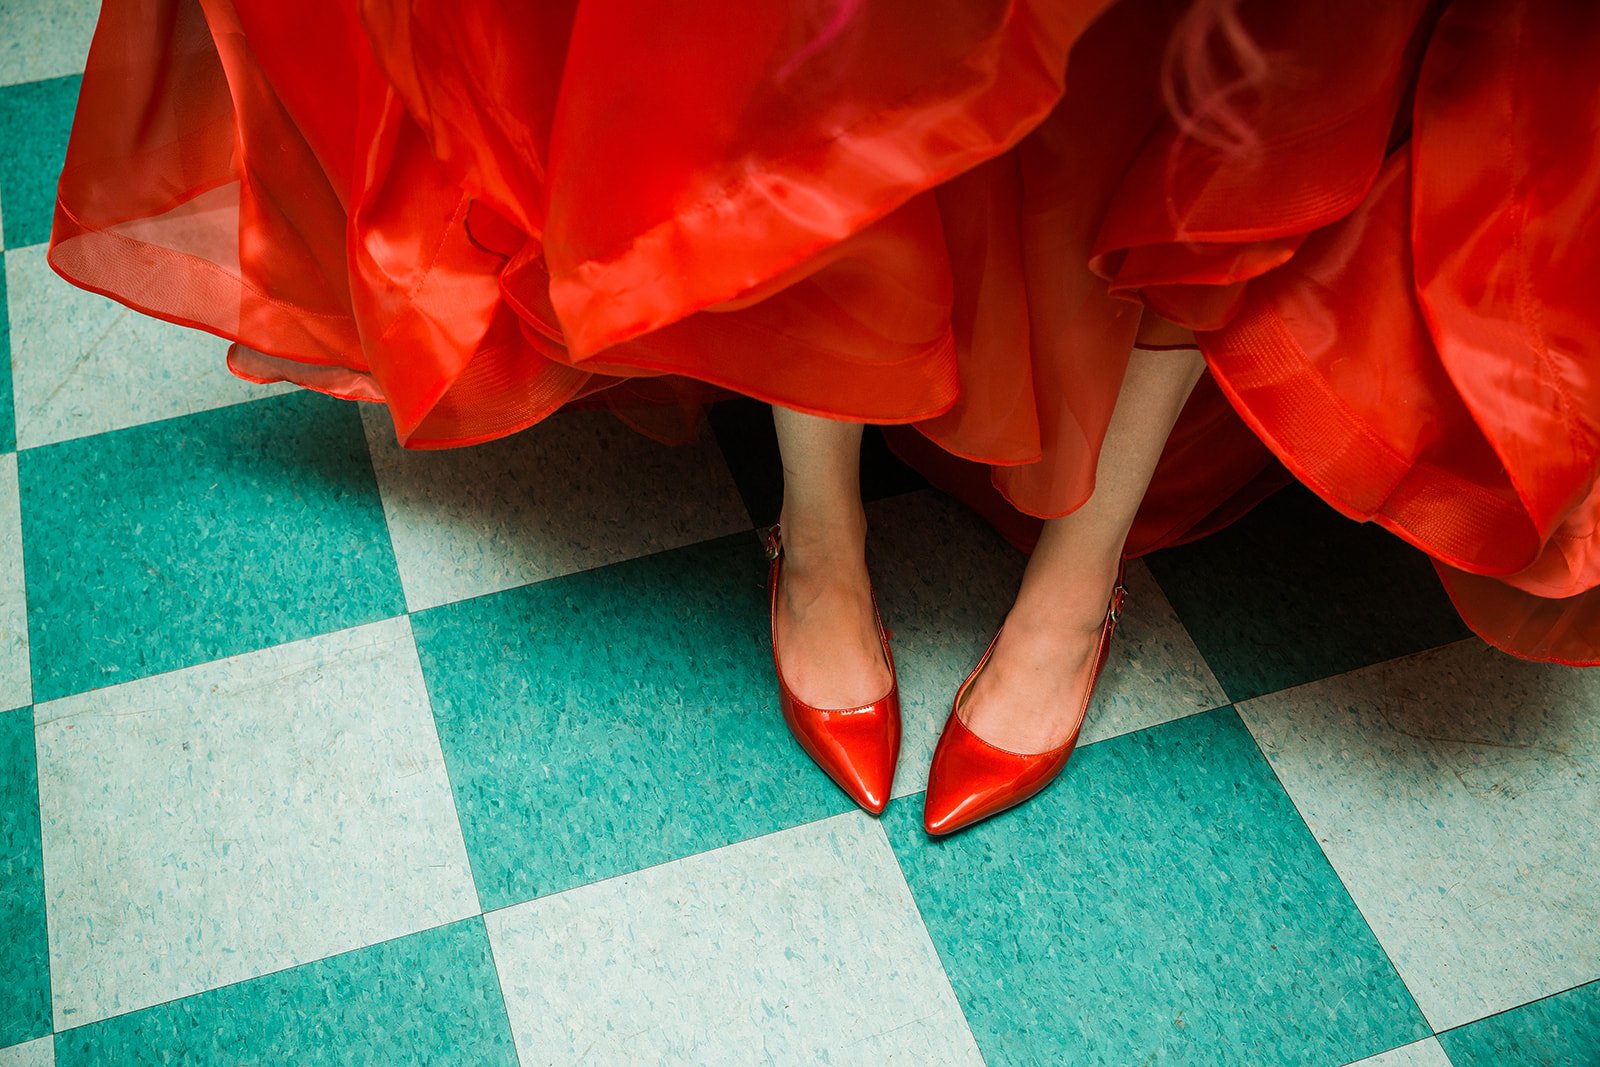  detail of Bride’s nontraditional red wedding shoes on green tile floor at dim sum restaurant Furama in Chicago 